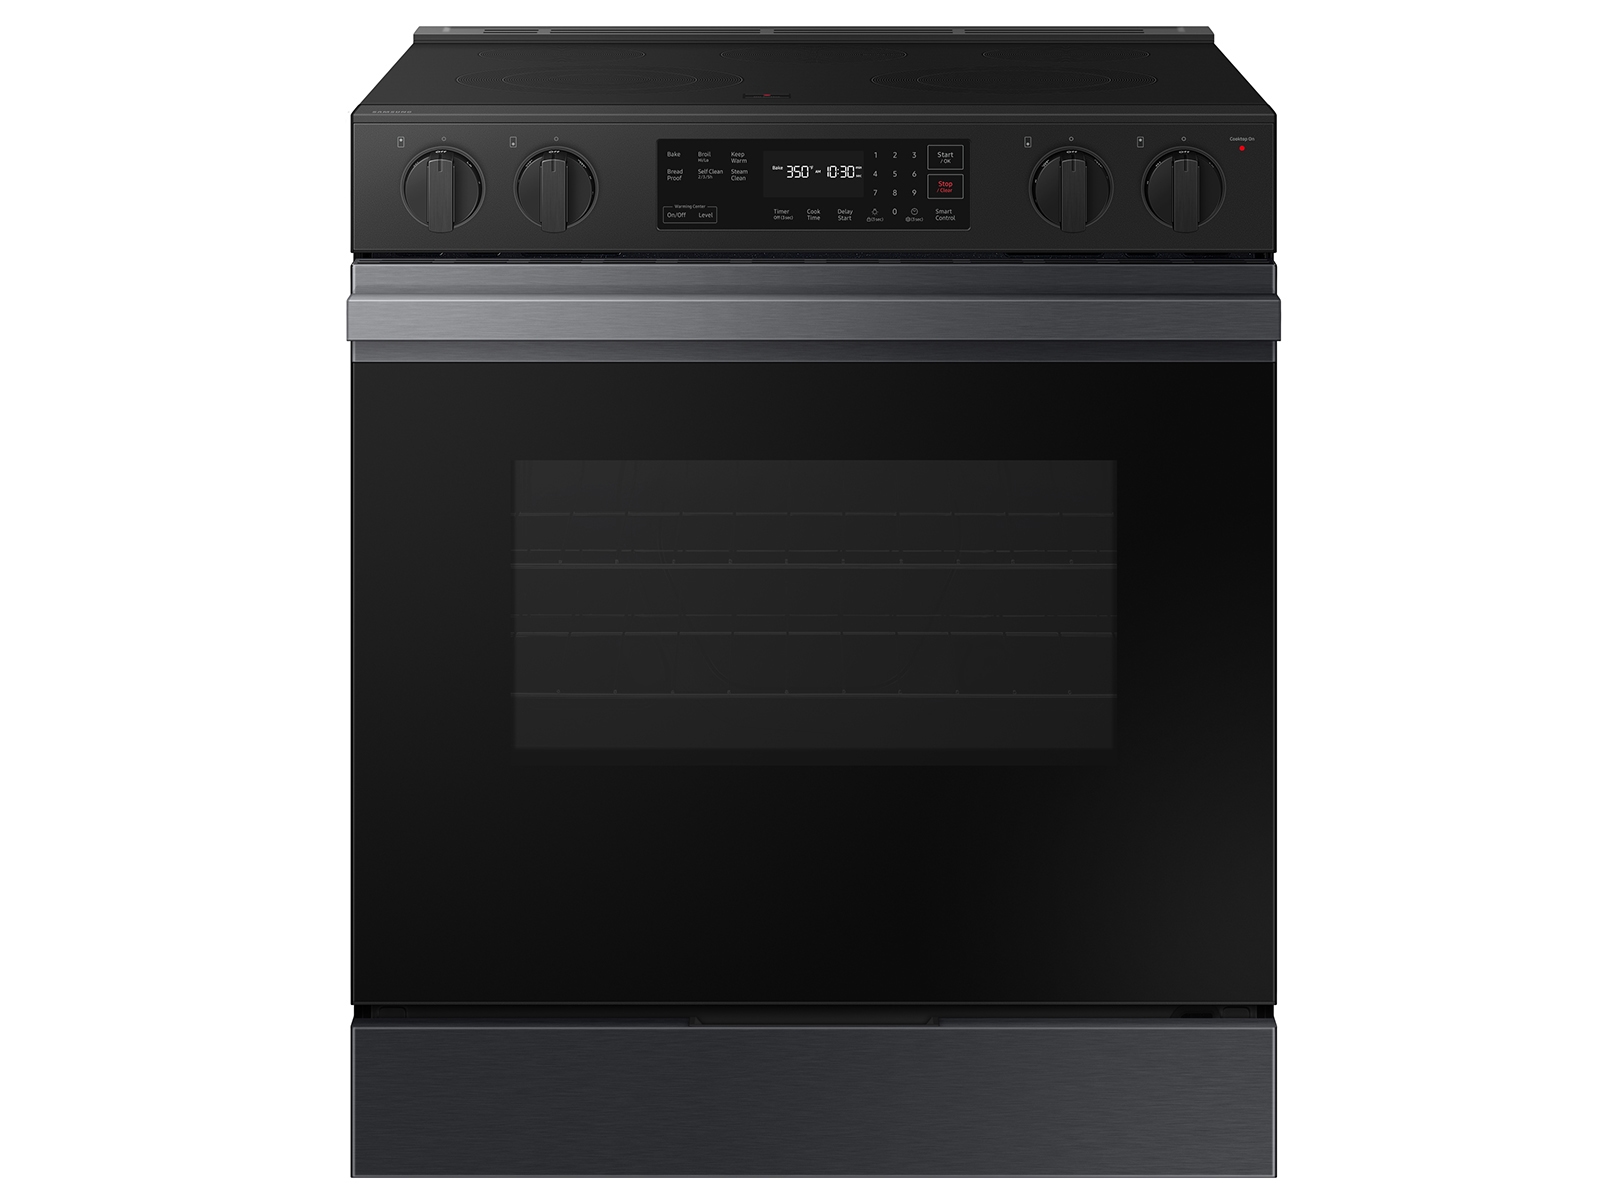 Bespoke Smart Slide-In Electric Range with Precision Knobs